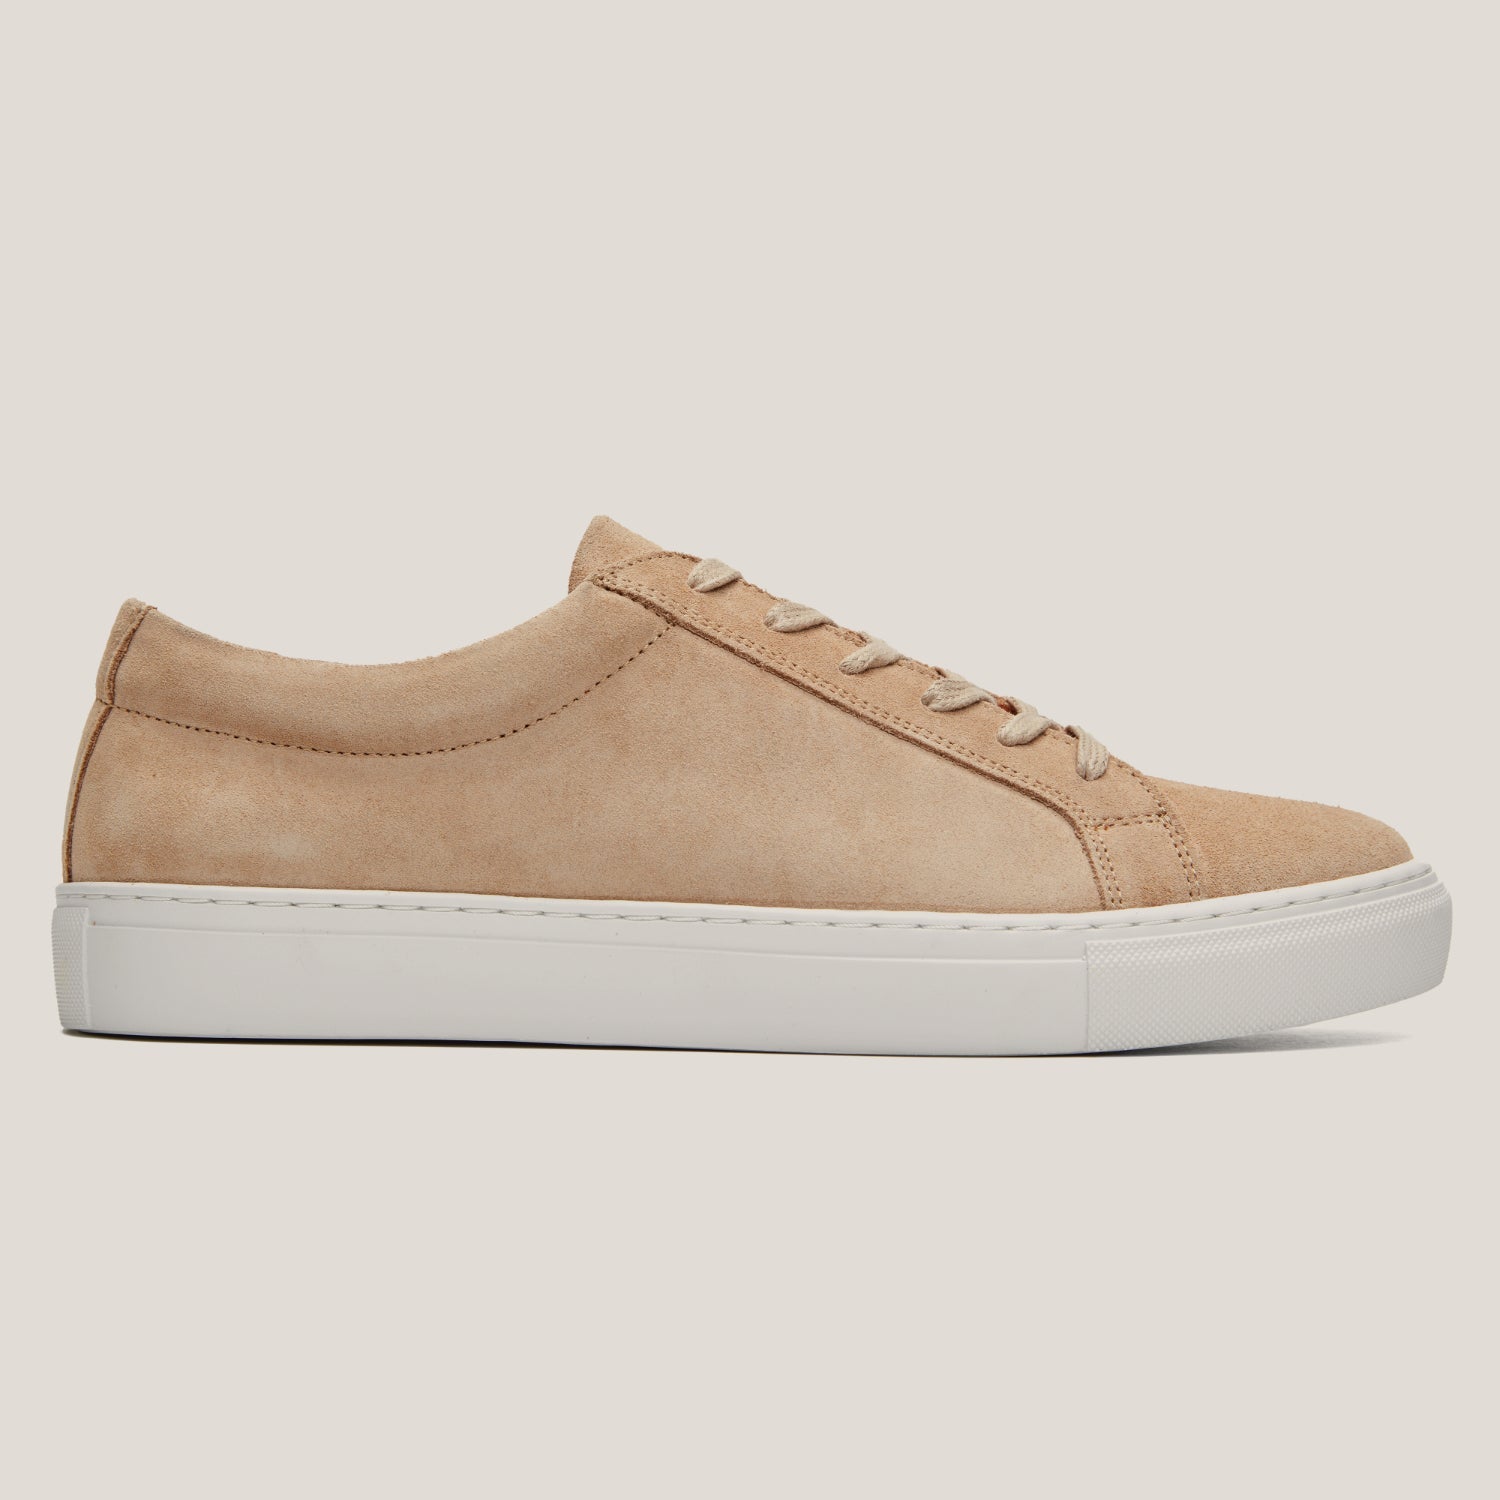 Baltimore Cappuccino Suede - Reinhard Frans - Sneakers